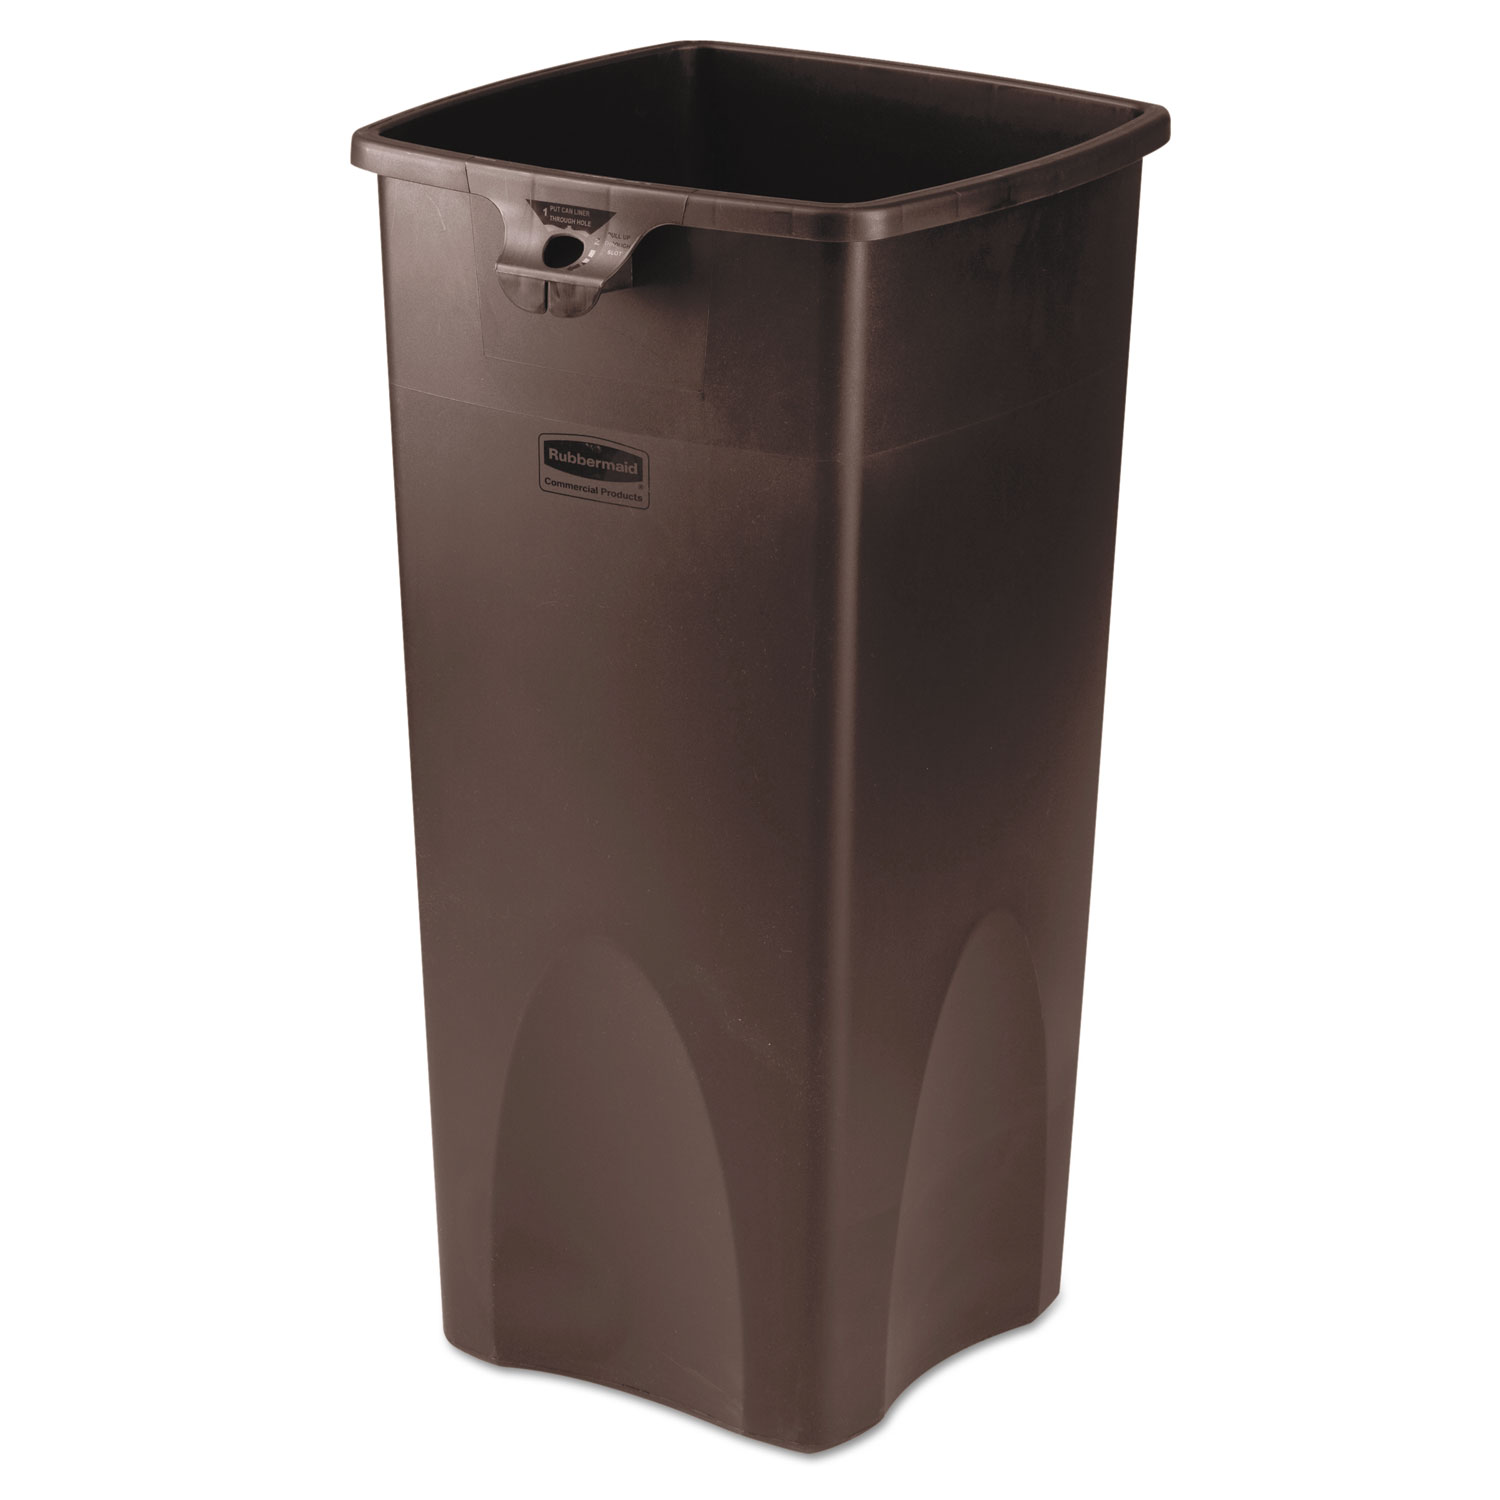  Rubbermaid Commercial FG356988BRN Untouchable Square Waste Receptacle, Plastic, 23 gal, Brown (RCP356988BRO) 